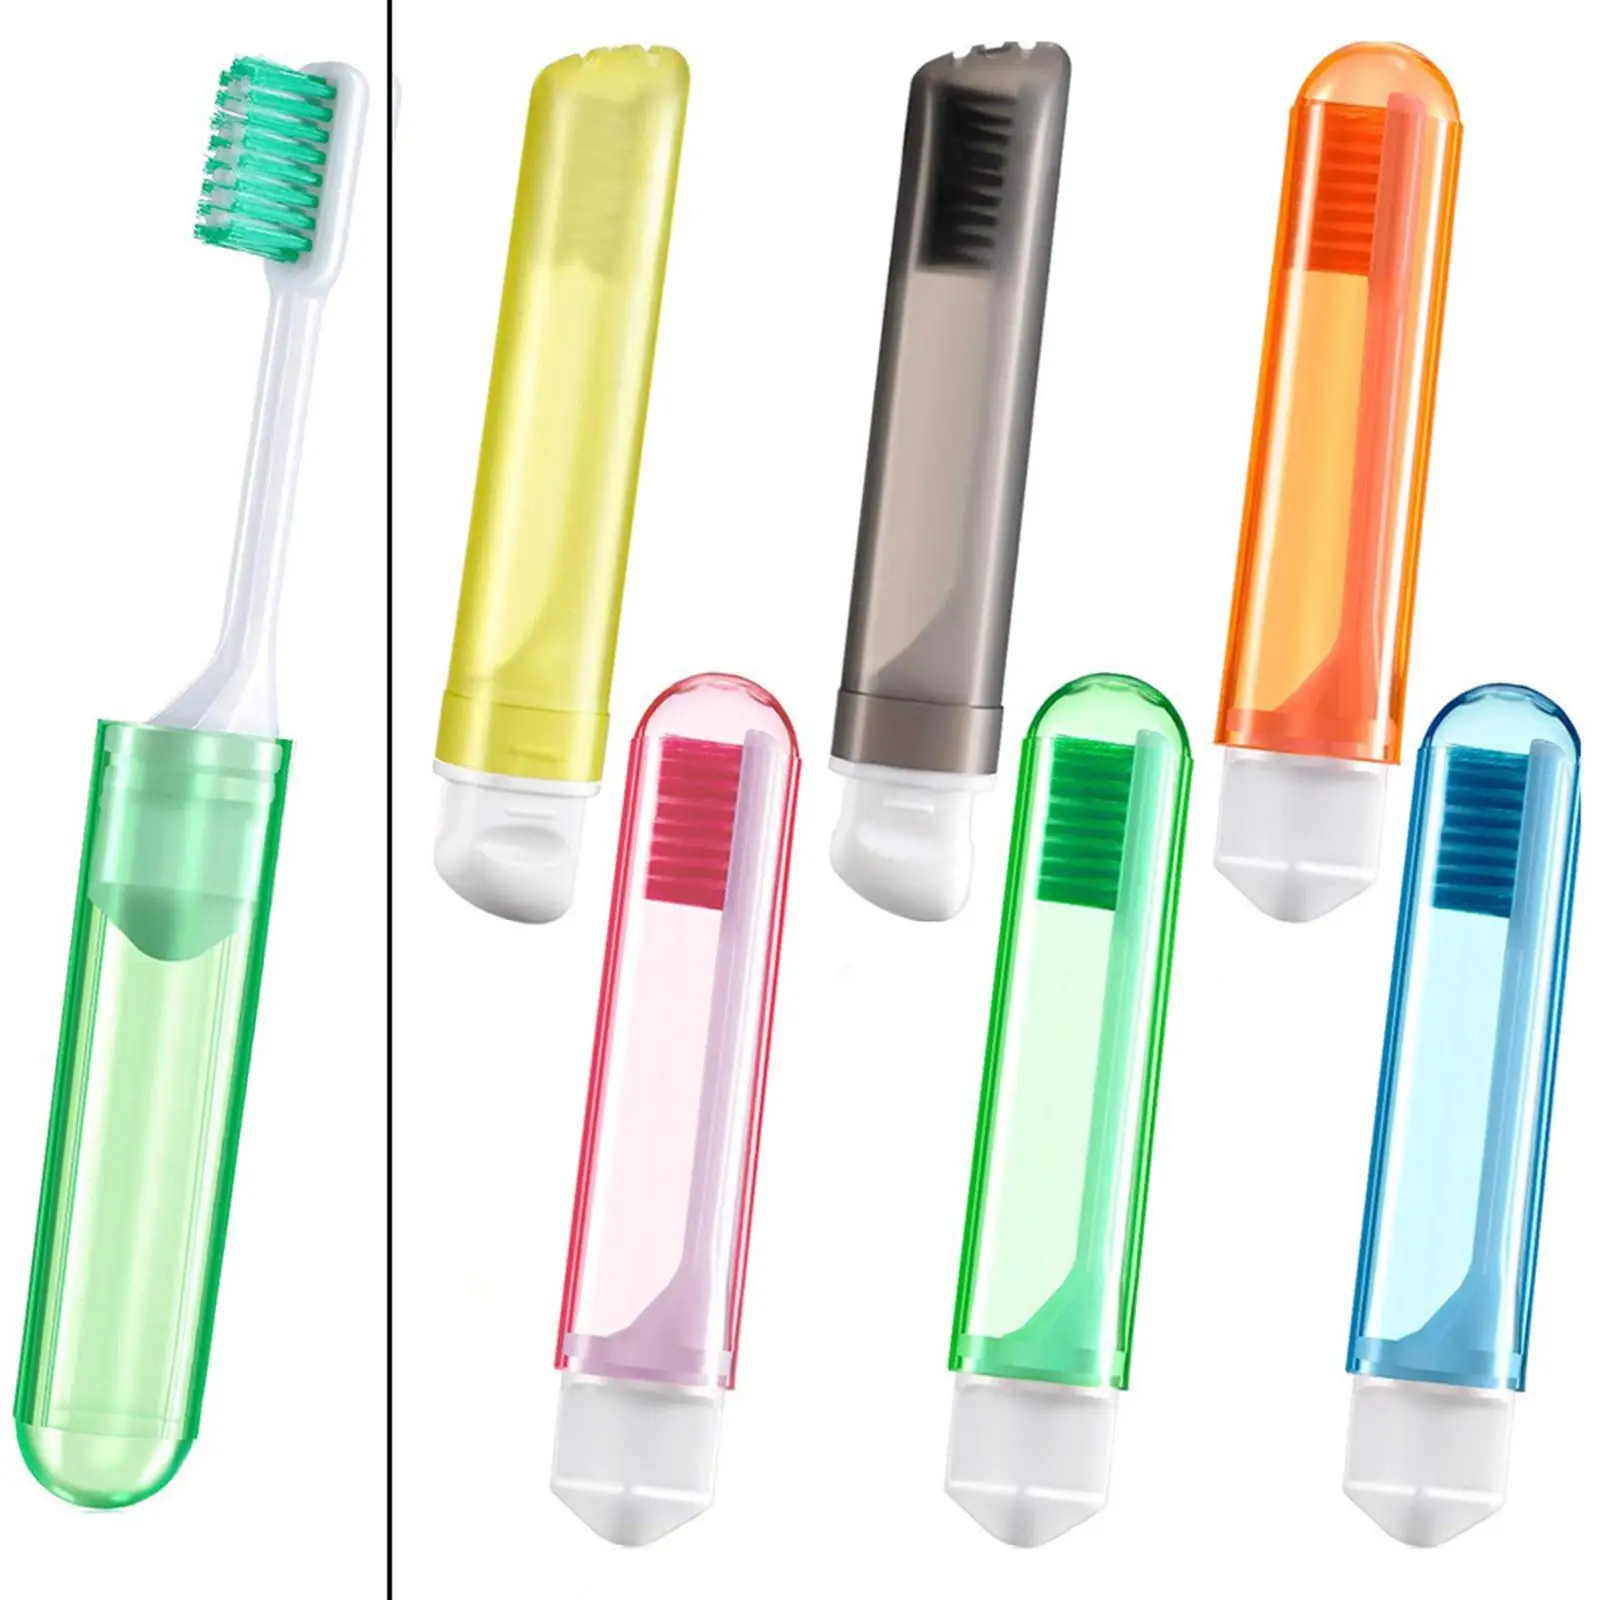 6Pcs Portable Folding Toothbrush Compact Easy to Take Toothbrush Travelling Toothbrush for Camping Outdoor Hiking Trip Vacation